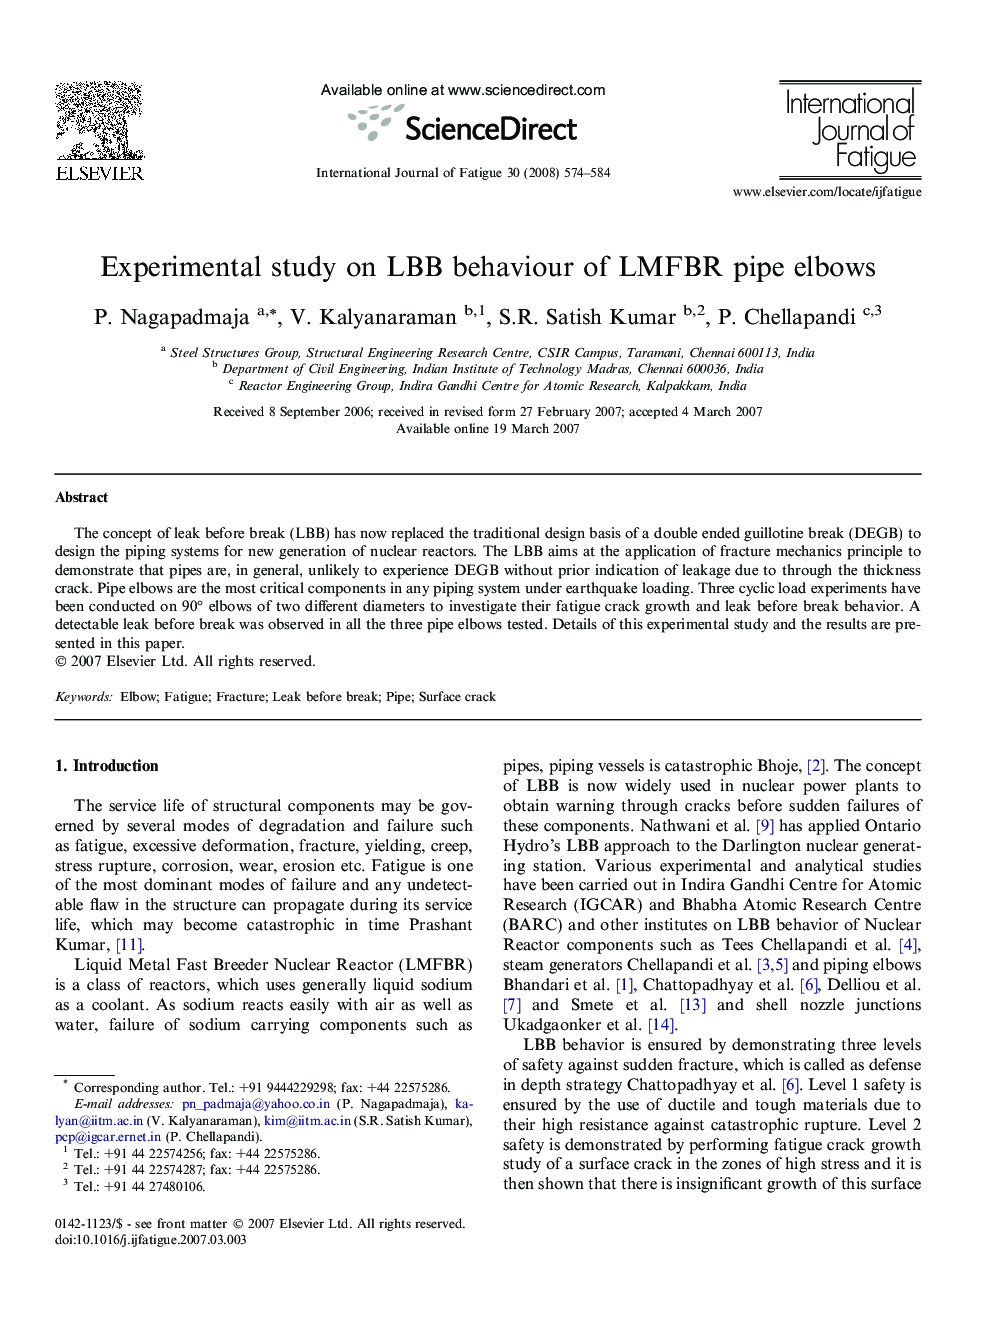 Experimental study on LBB behaviour of LMFBR pipe elbows